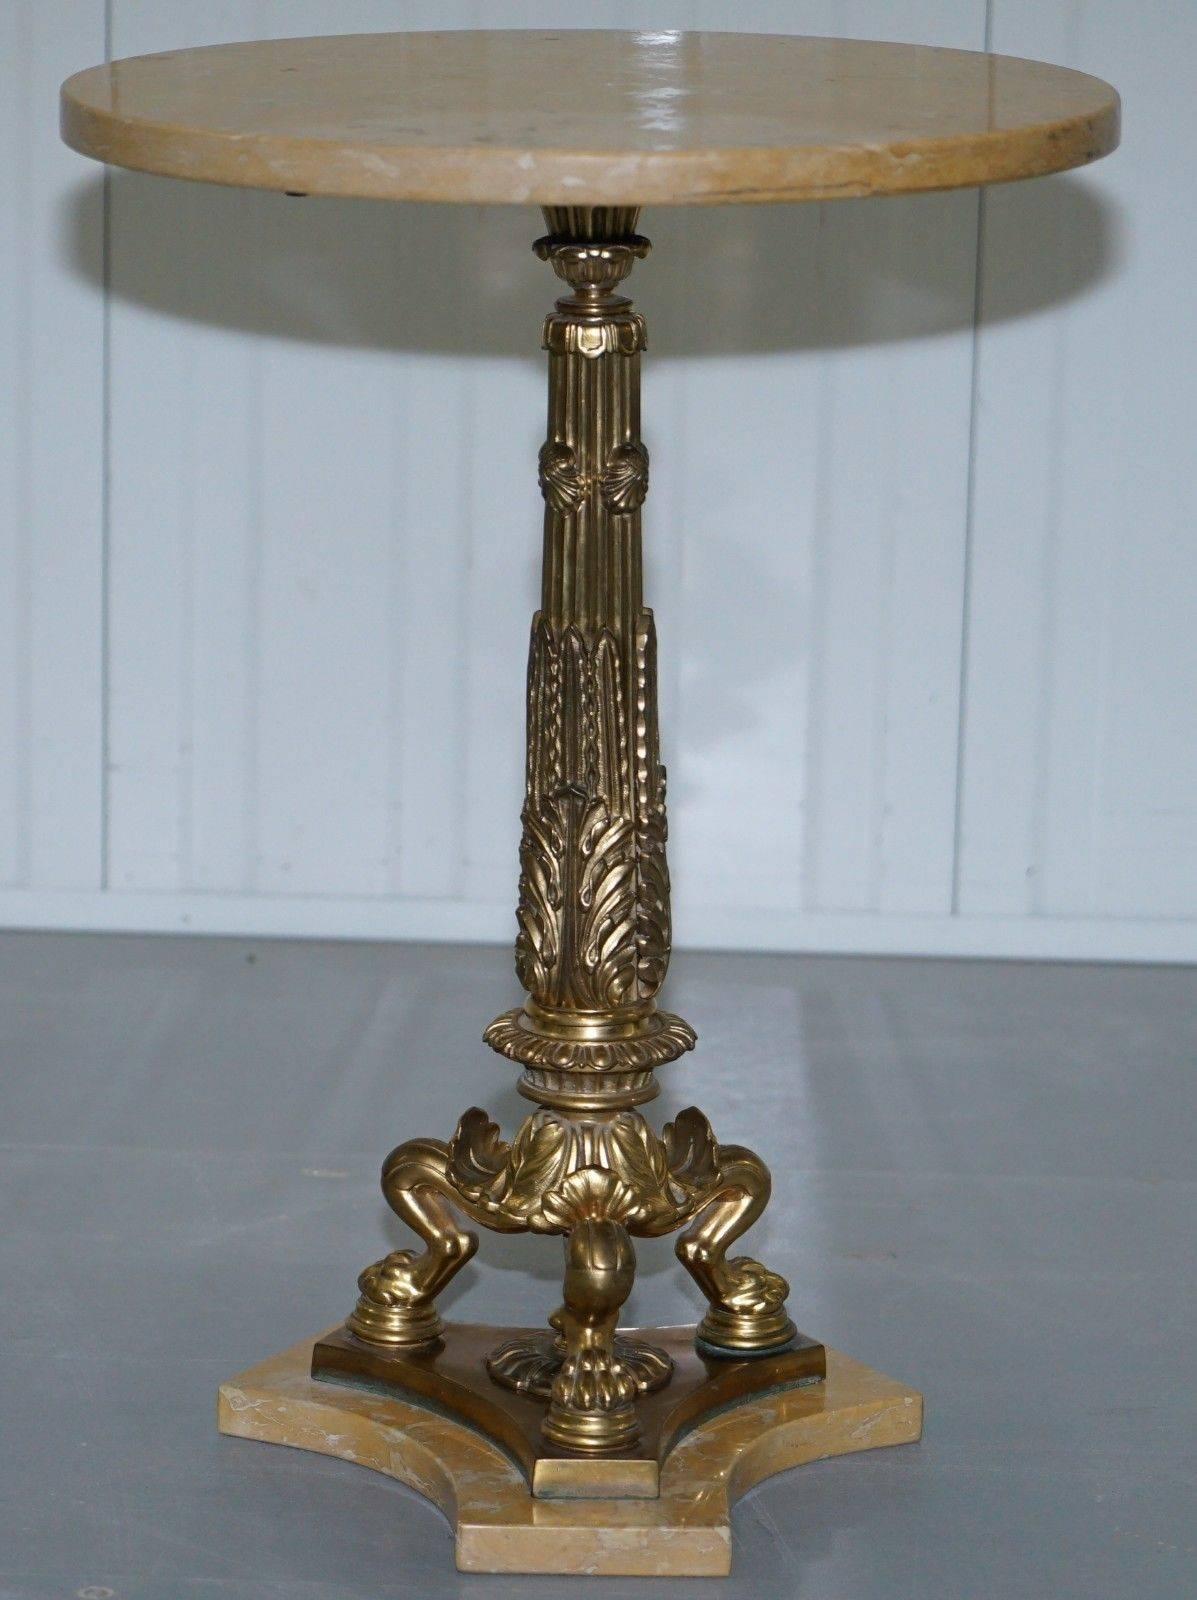 We are delighted to offer for sale this stunning solid marble topped and brass pillared base finished with decorative legs side table

A very good looking and well-made piece, the marble has a subtle and stylish grain, the base is very grand and